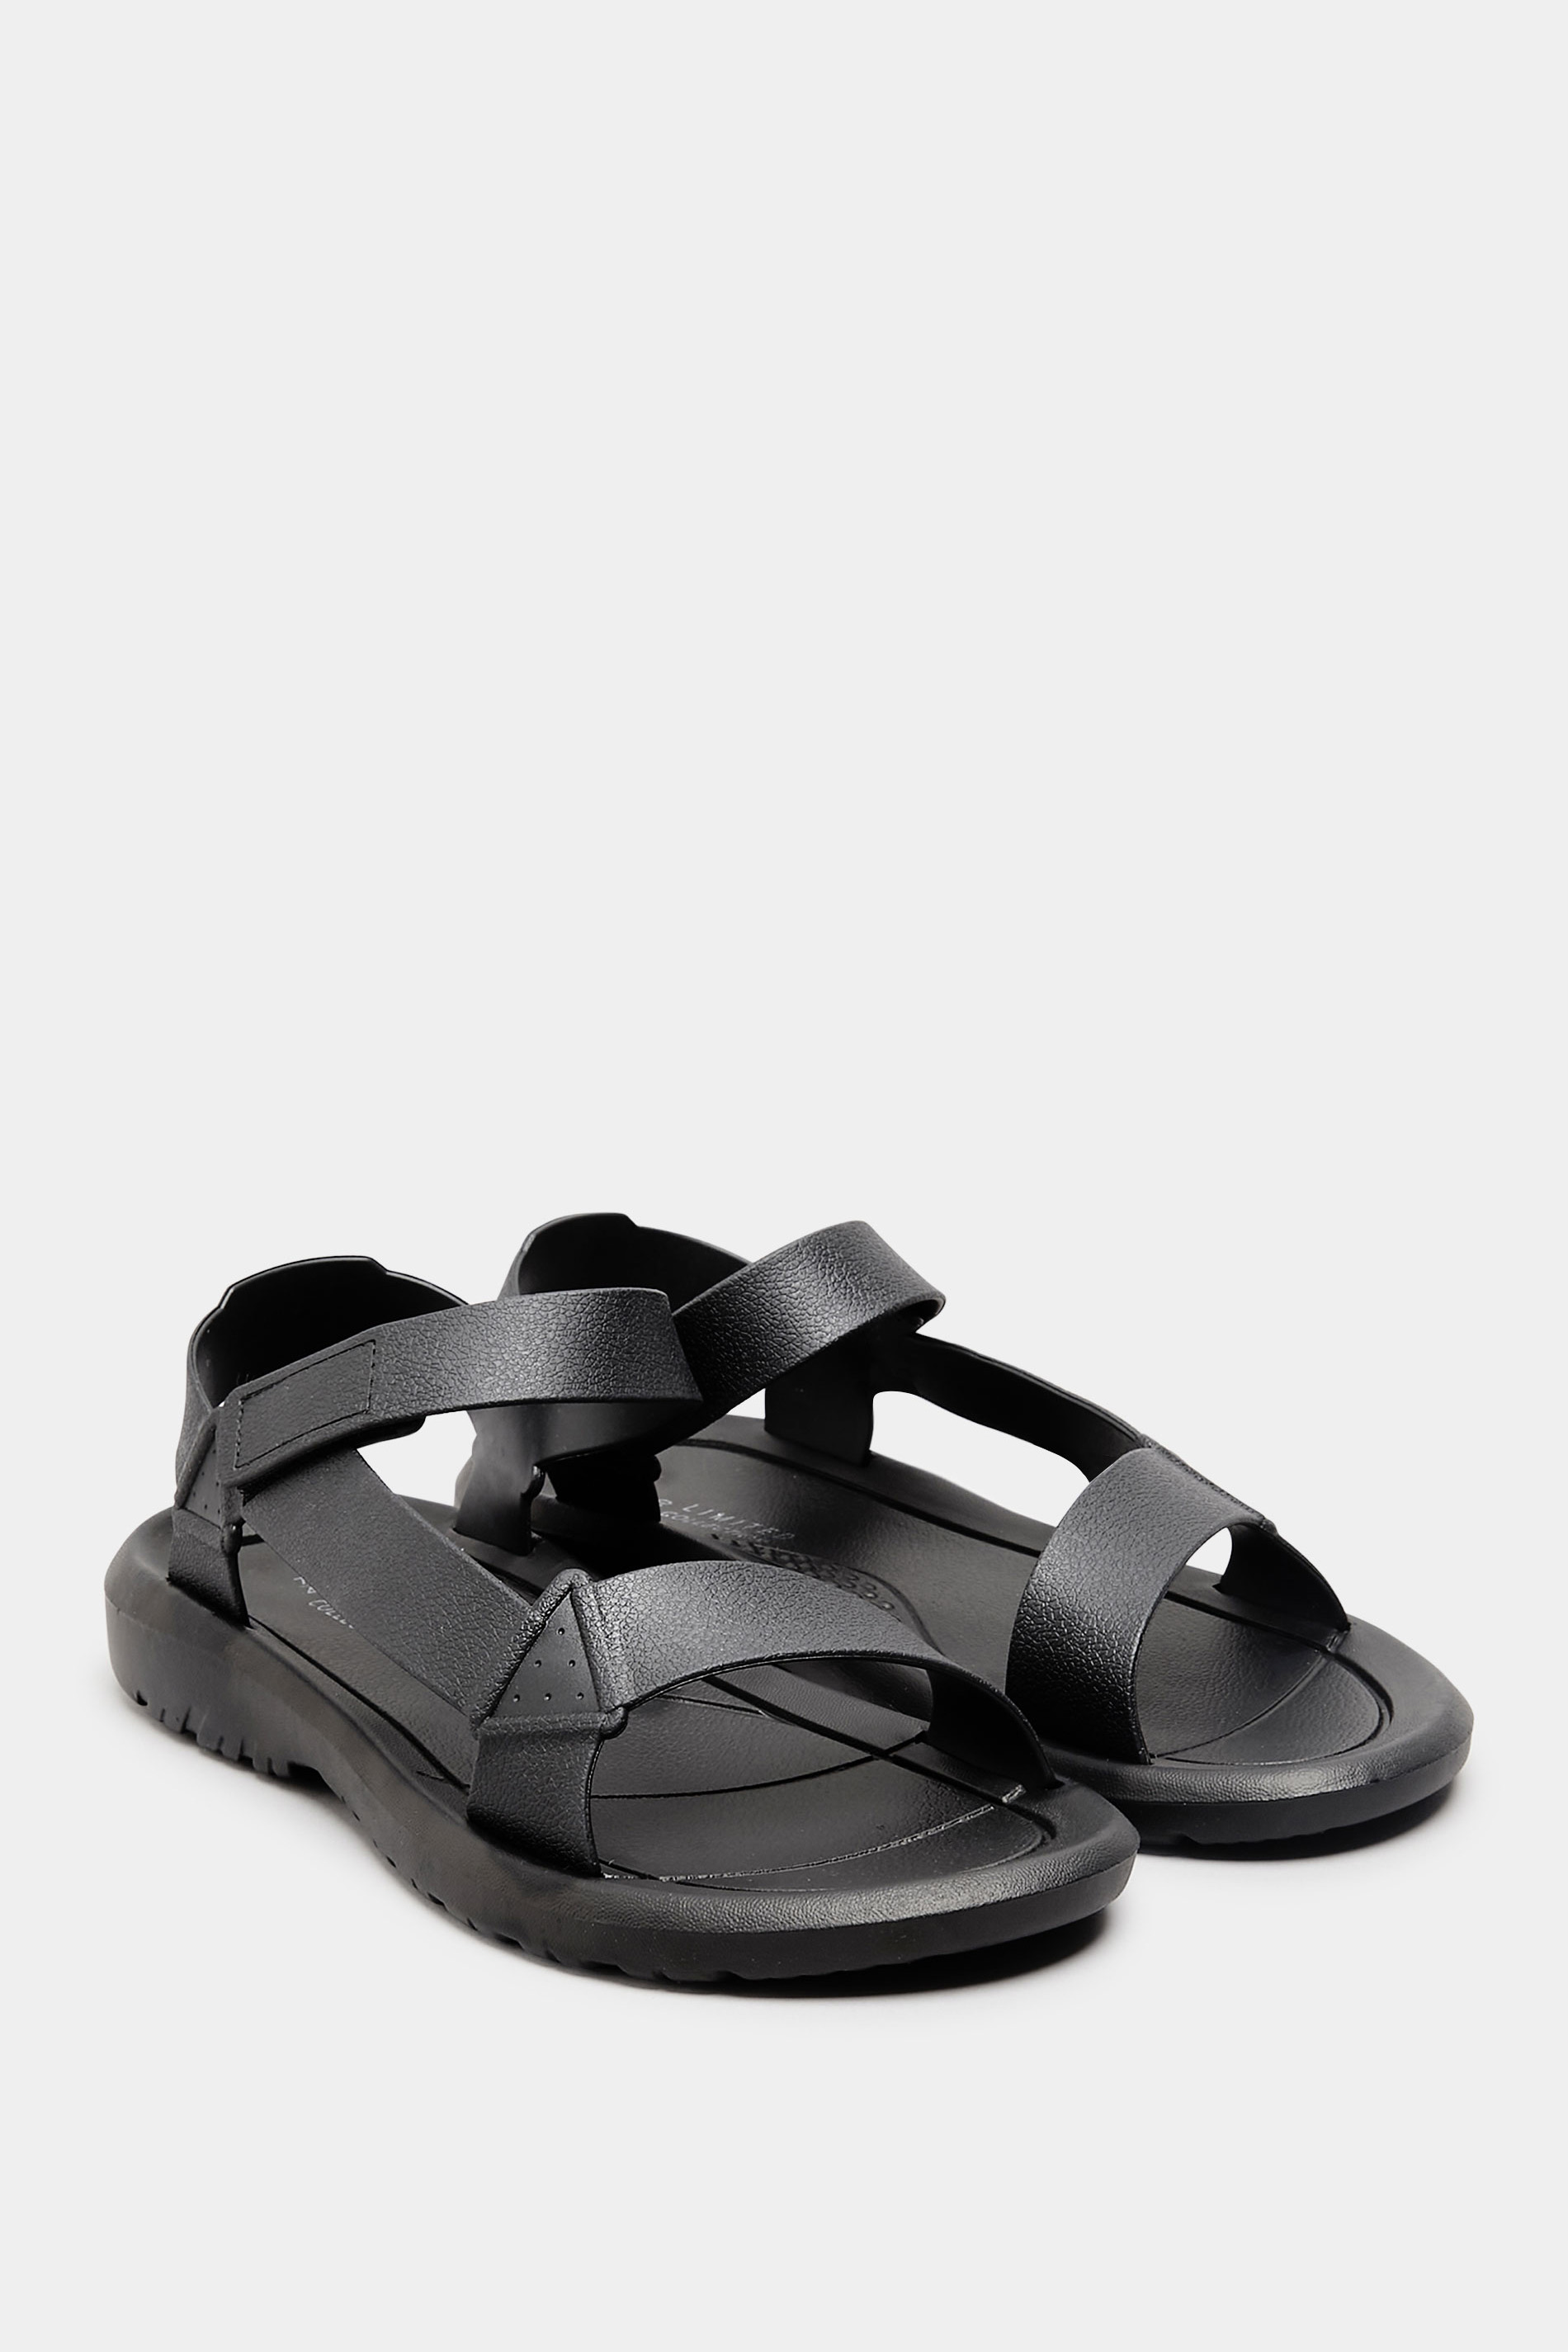 LIMITED COLLECTION Black Adjustable Strap Sandals In Wide E Fit | Yours Clothing 2